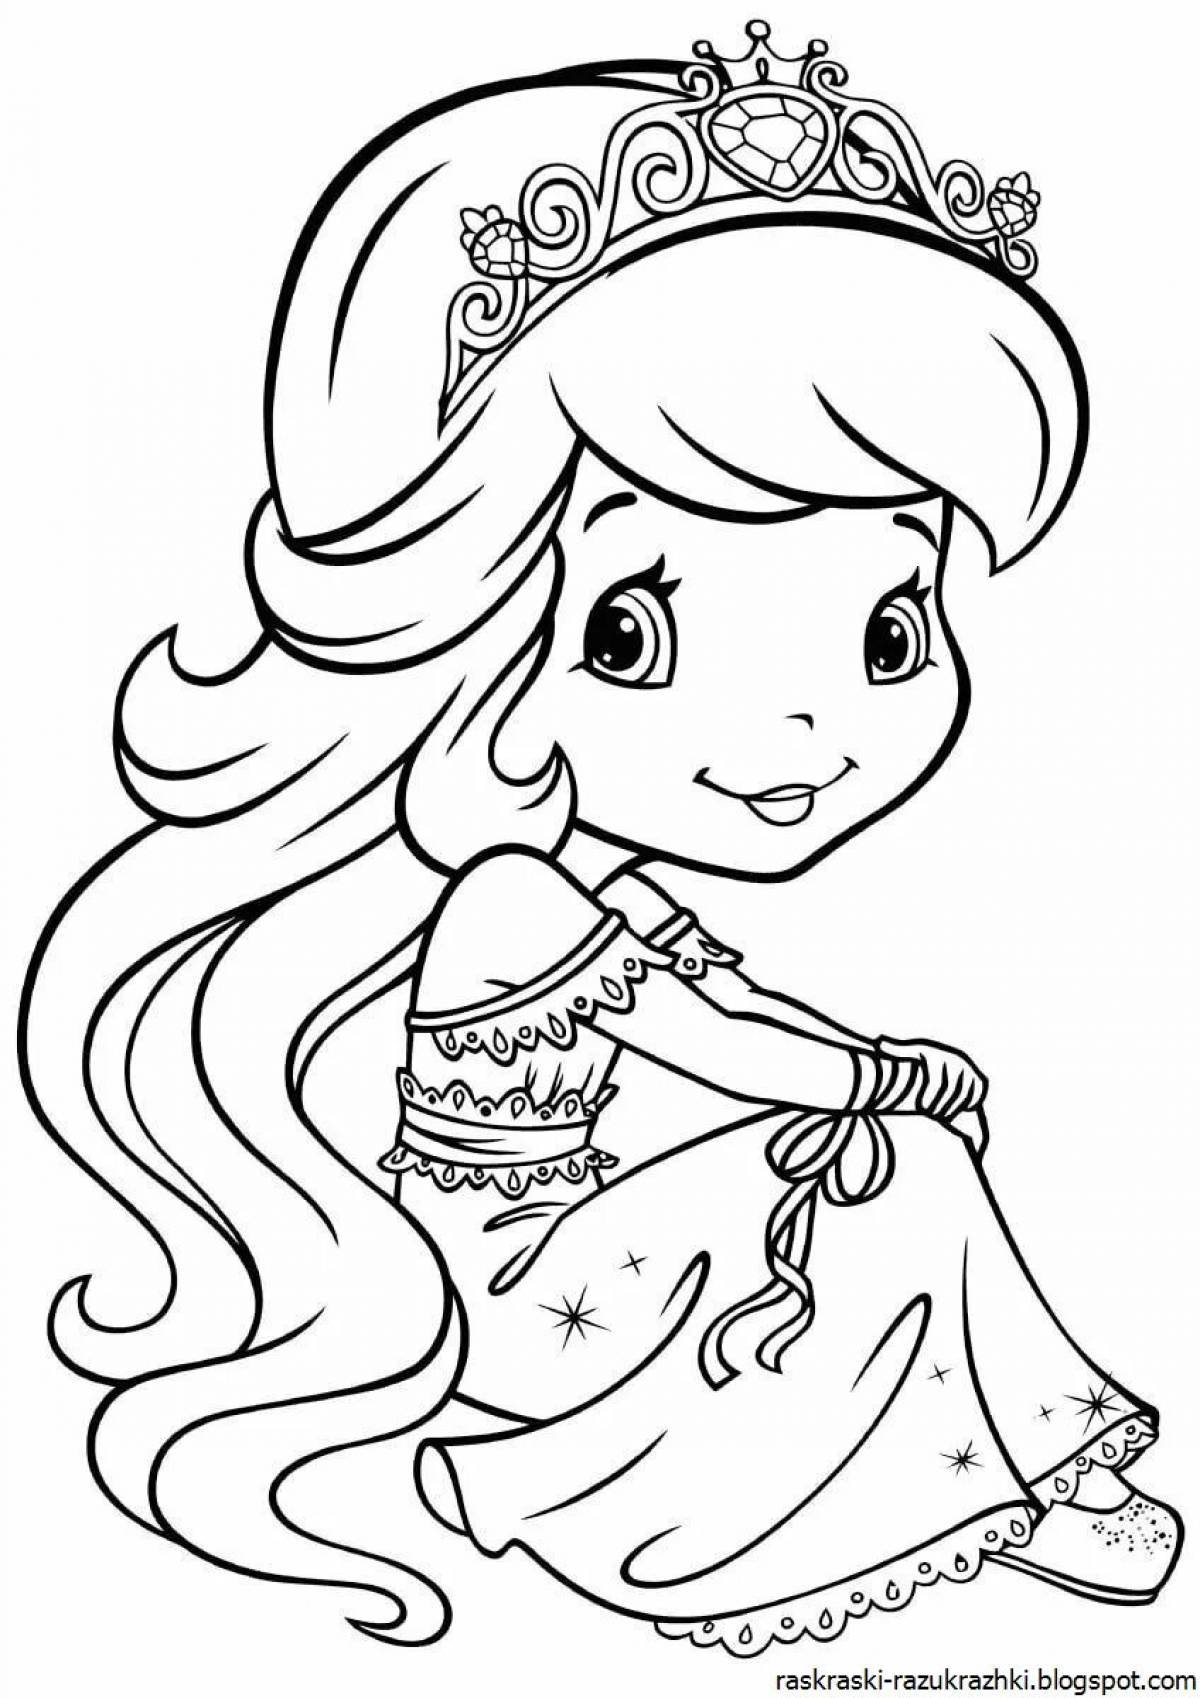 Sweet princess coloring for girls 4 years old